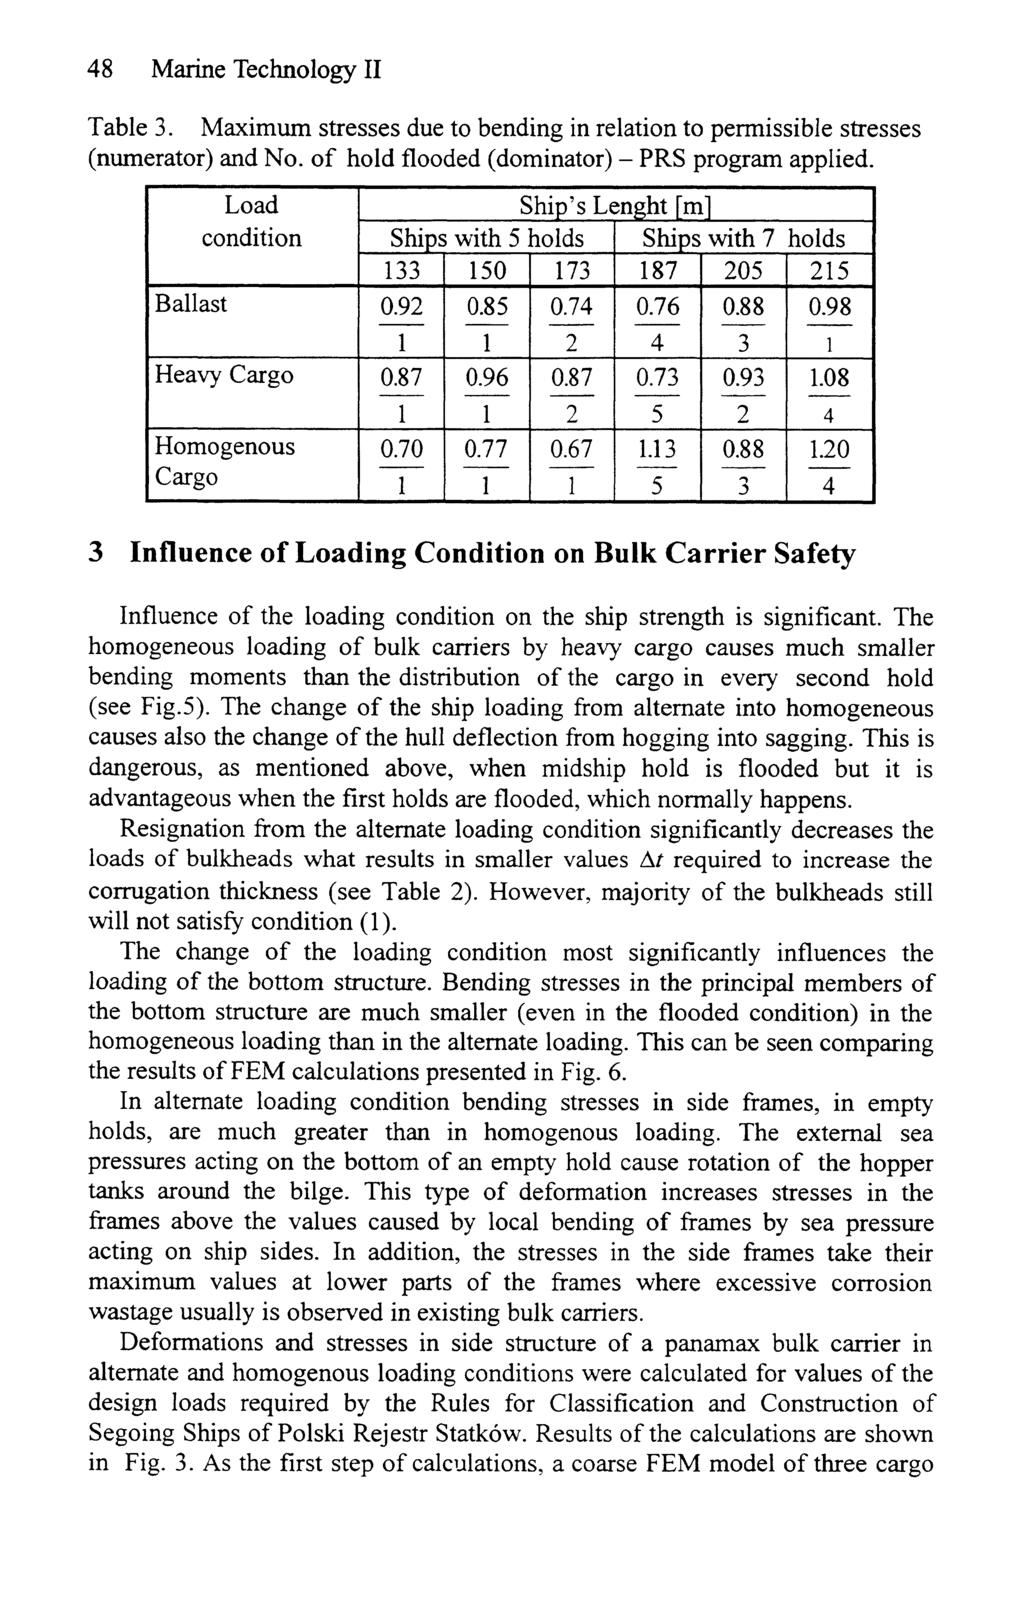 8 Marine Technology II Table 3. Maximum stresses due to bending in relation to permissible stresses (numerator) and No. of hold flooded (dominator) - PRS program applied.